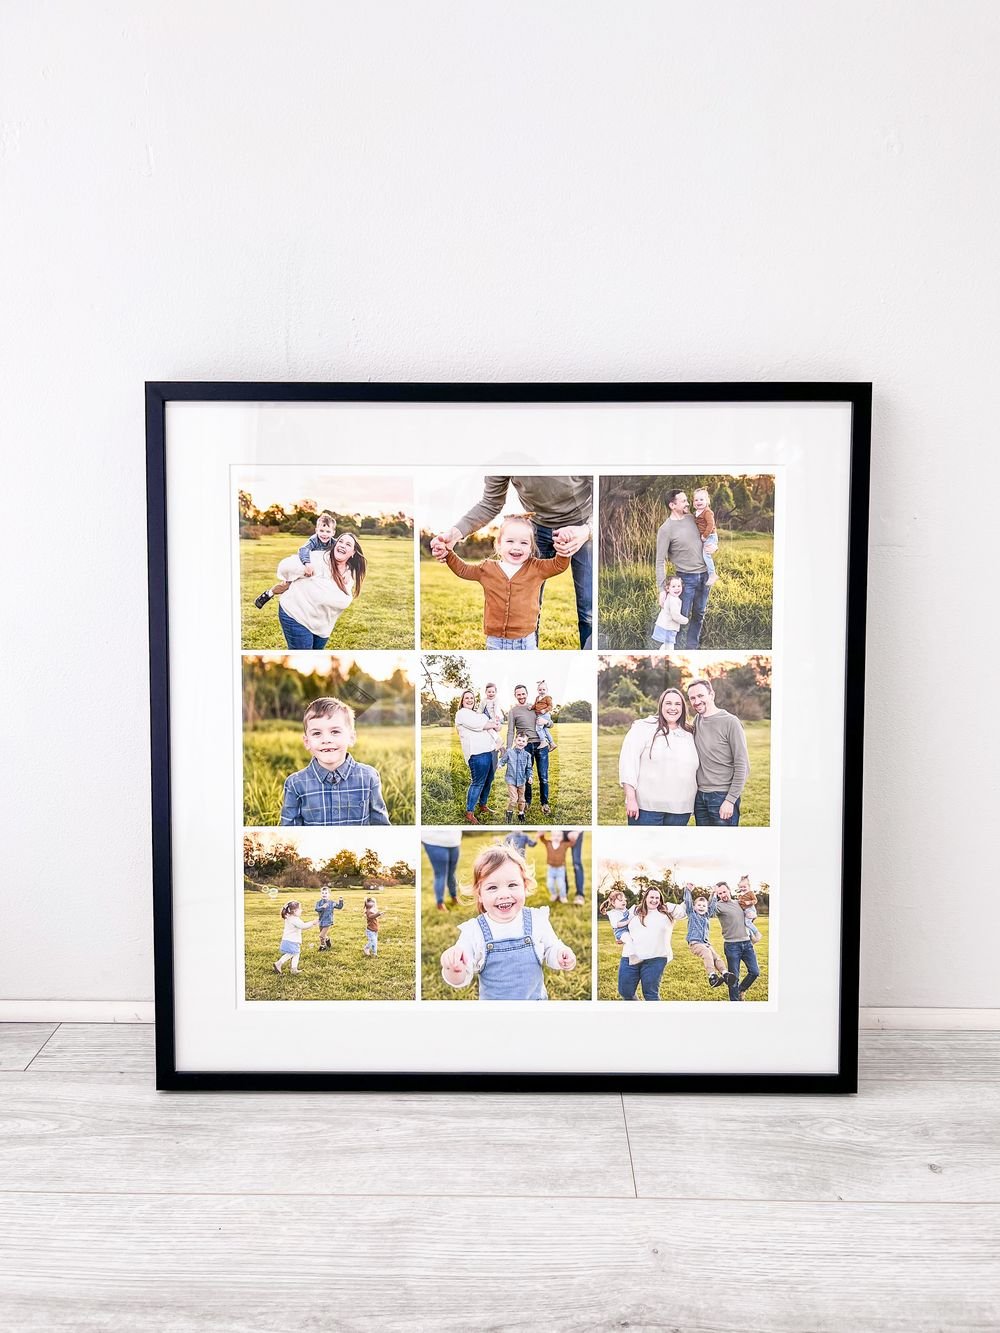 Printed Photos are the Best Family Photos